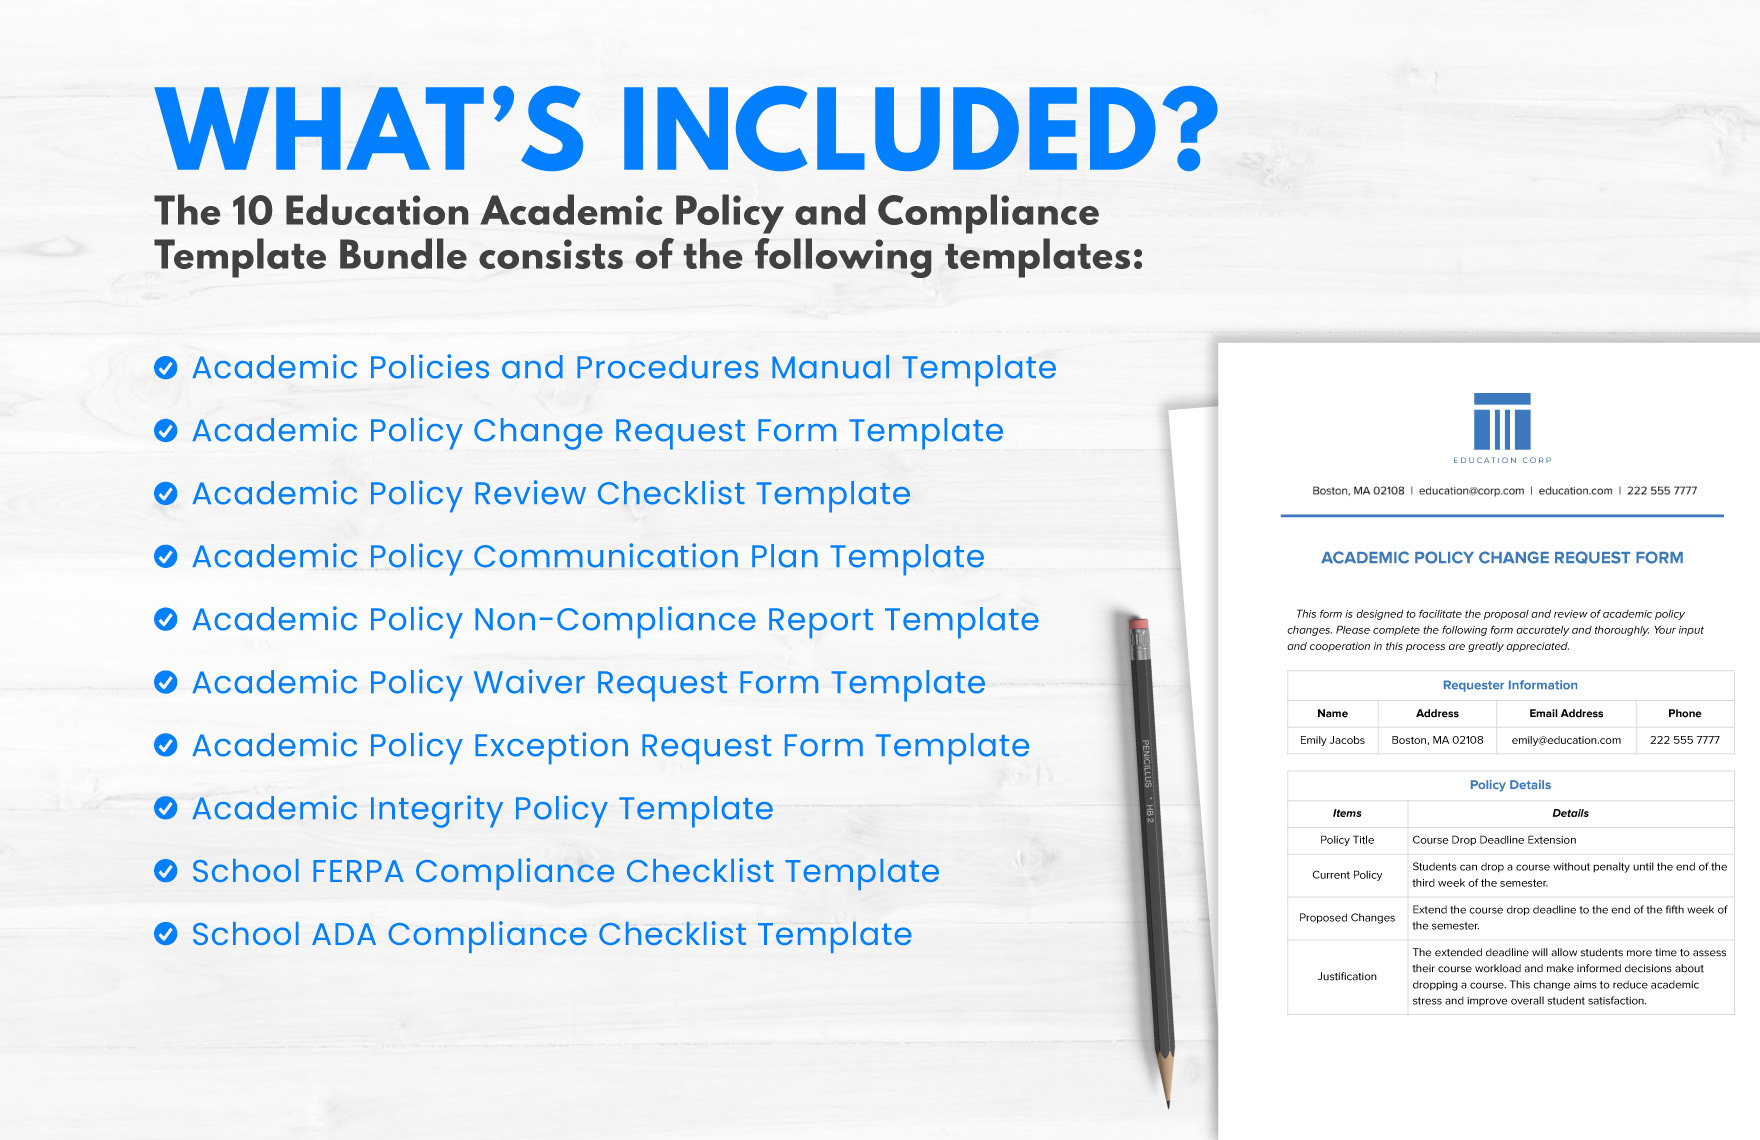 10 Education Academic Policy and Compliance Template Bundle